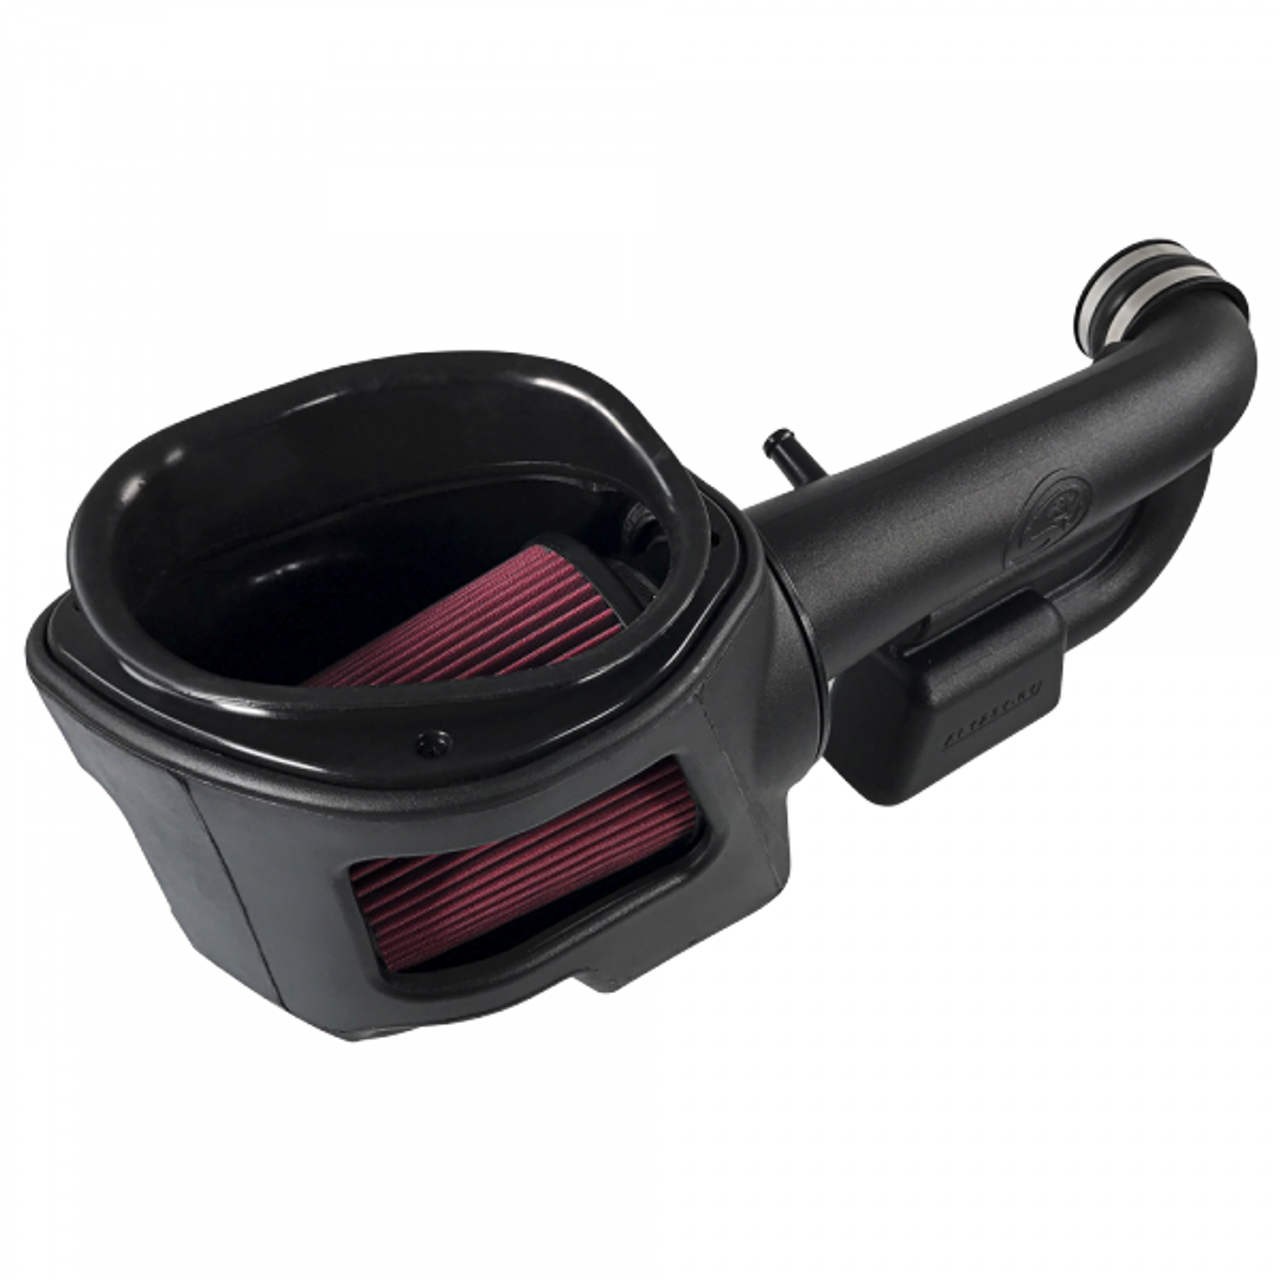 SB Filters 75-5060 Cold Air Intake for 2012-2016 Jeep Wrangler JK